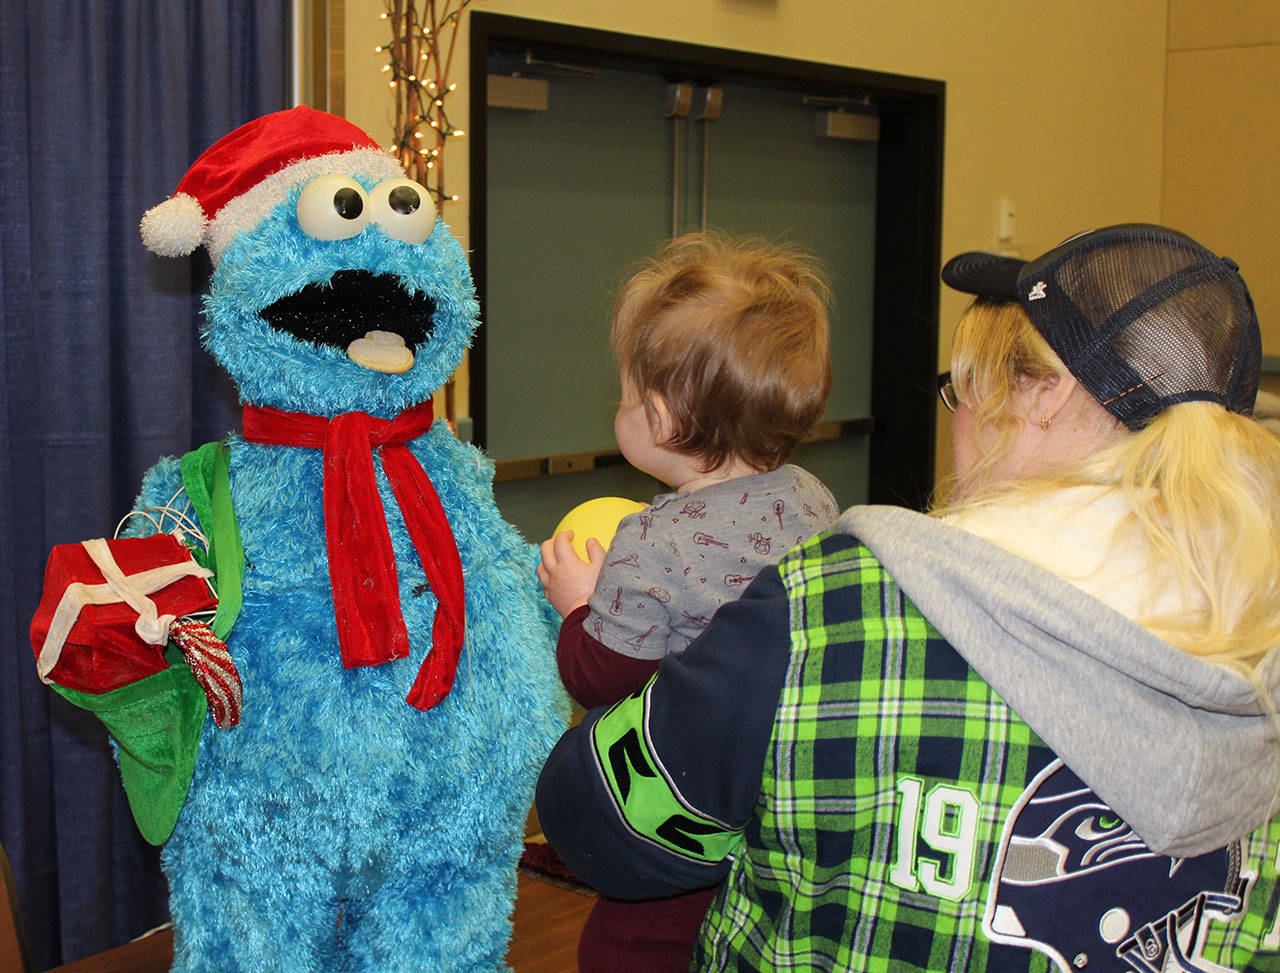 Kiwanis Kids Christmas Party provides gifts galore